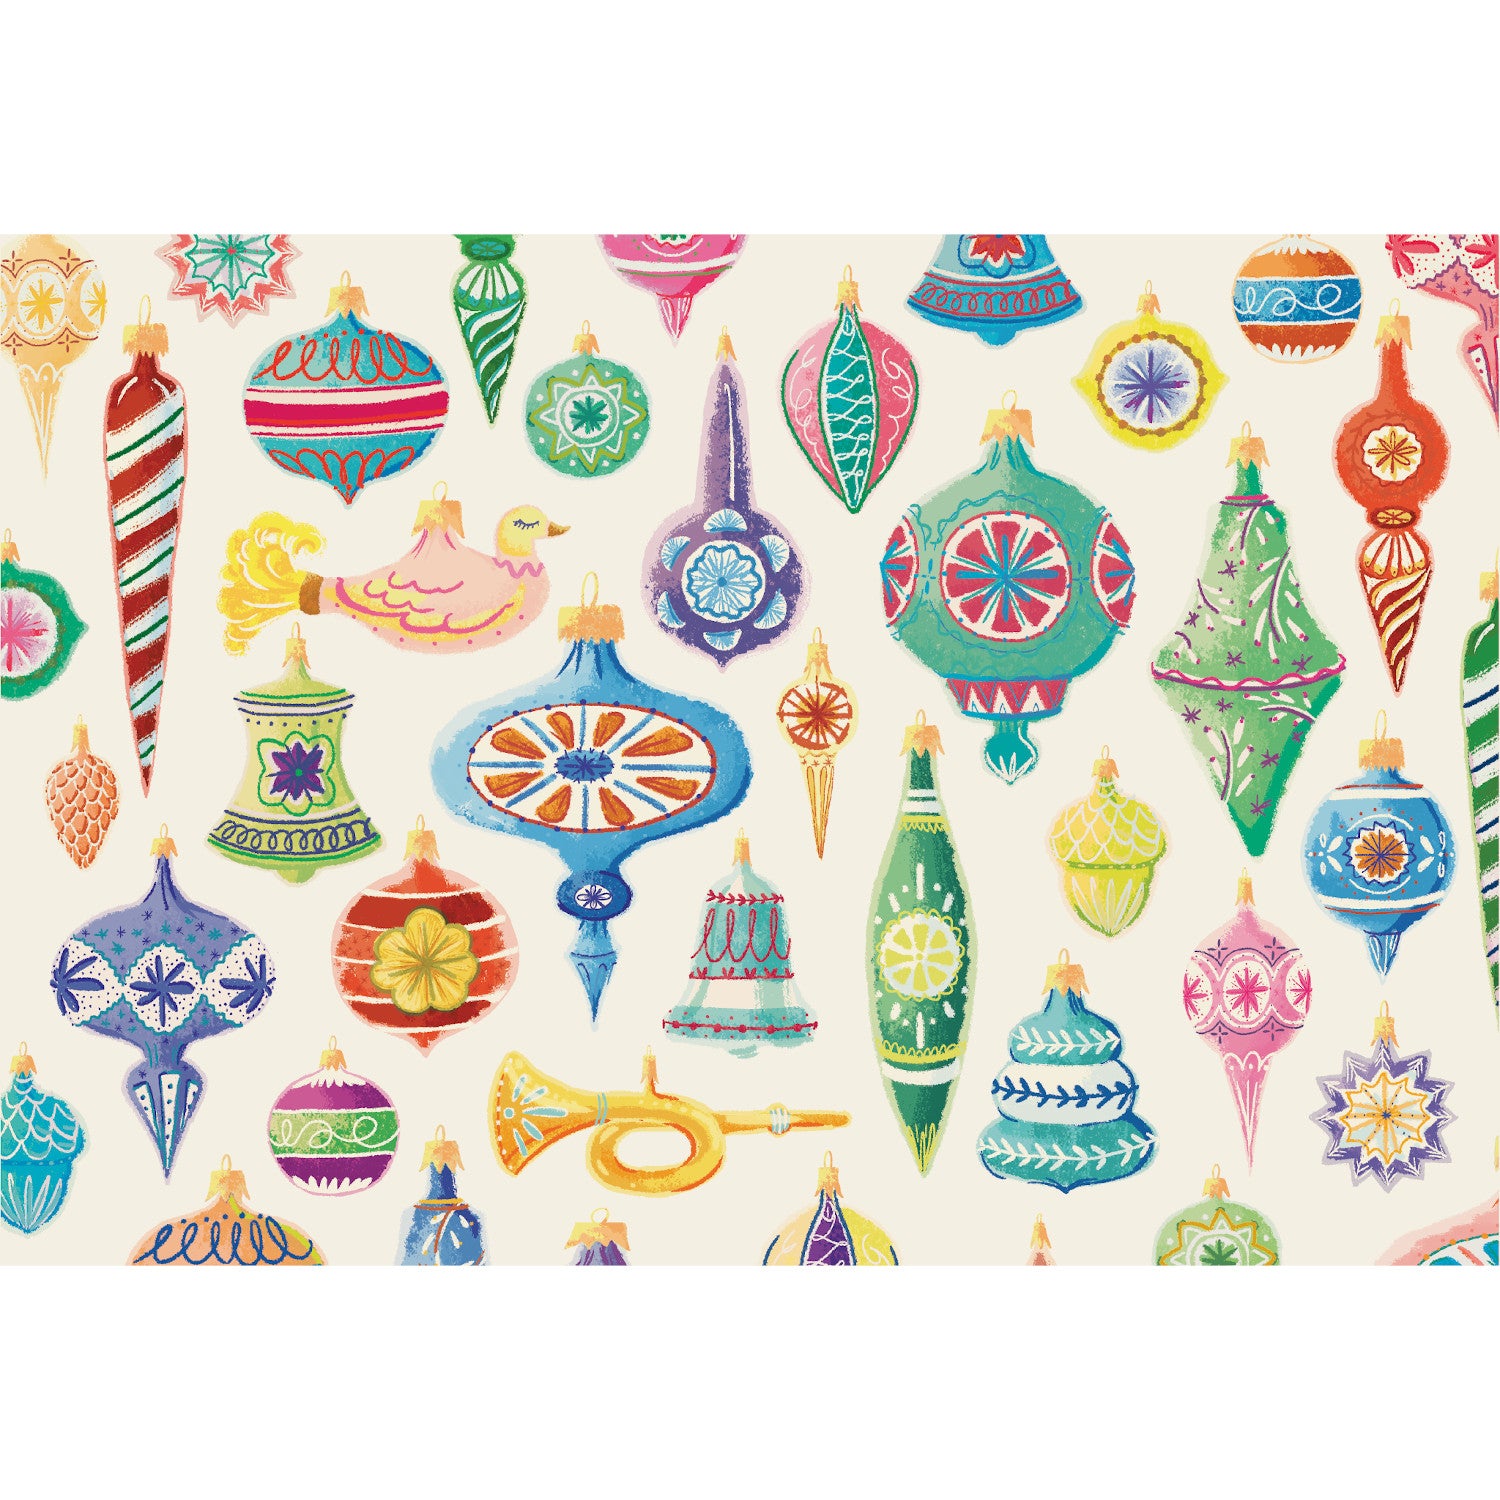 A cheerful illustration of multicolored  vintage-style glass Christmas ornaments of various sizes, evenly spaced on a white background. 